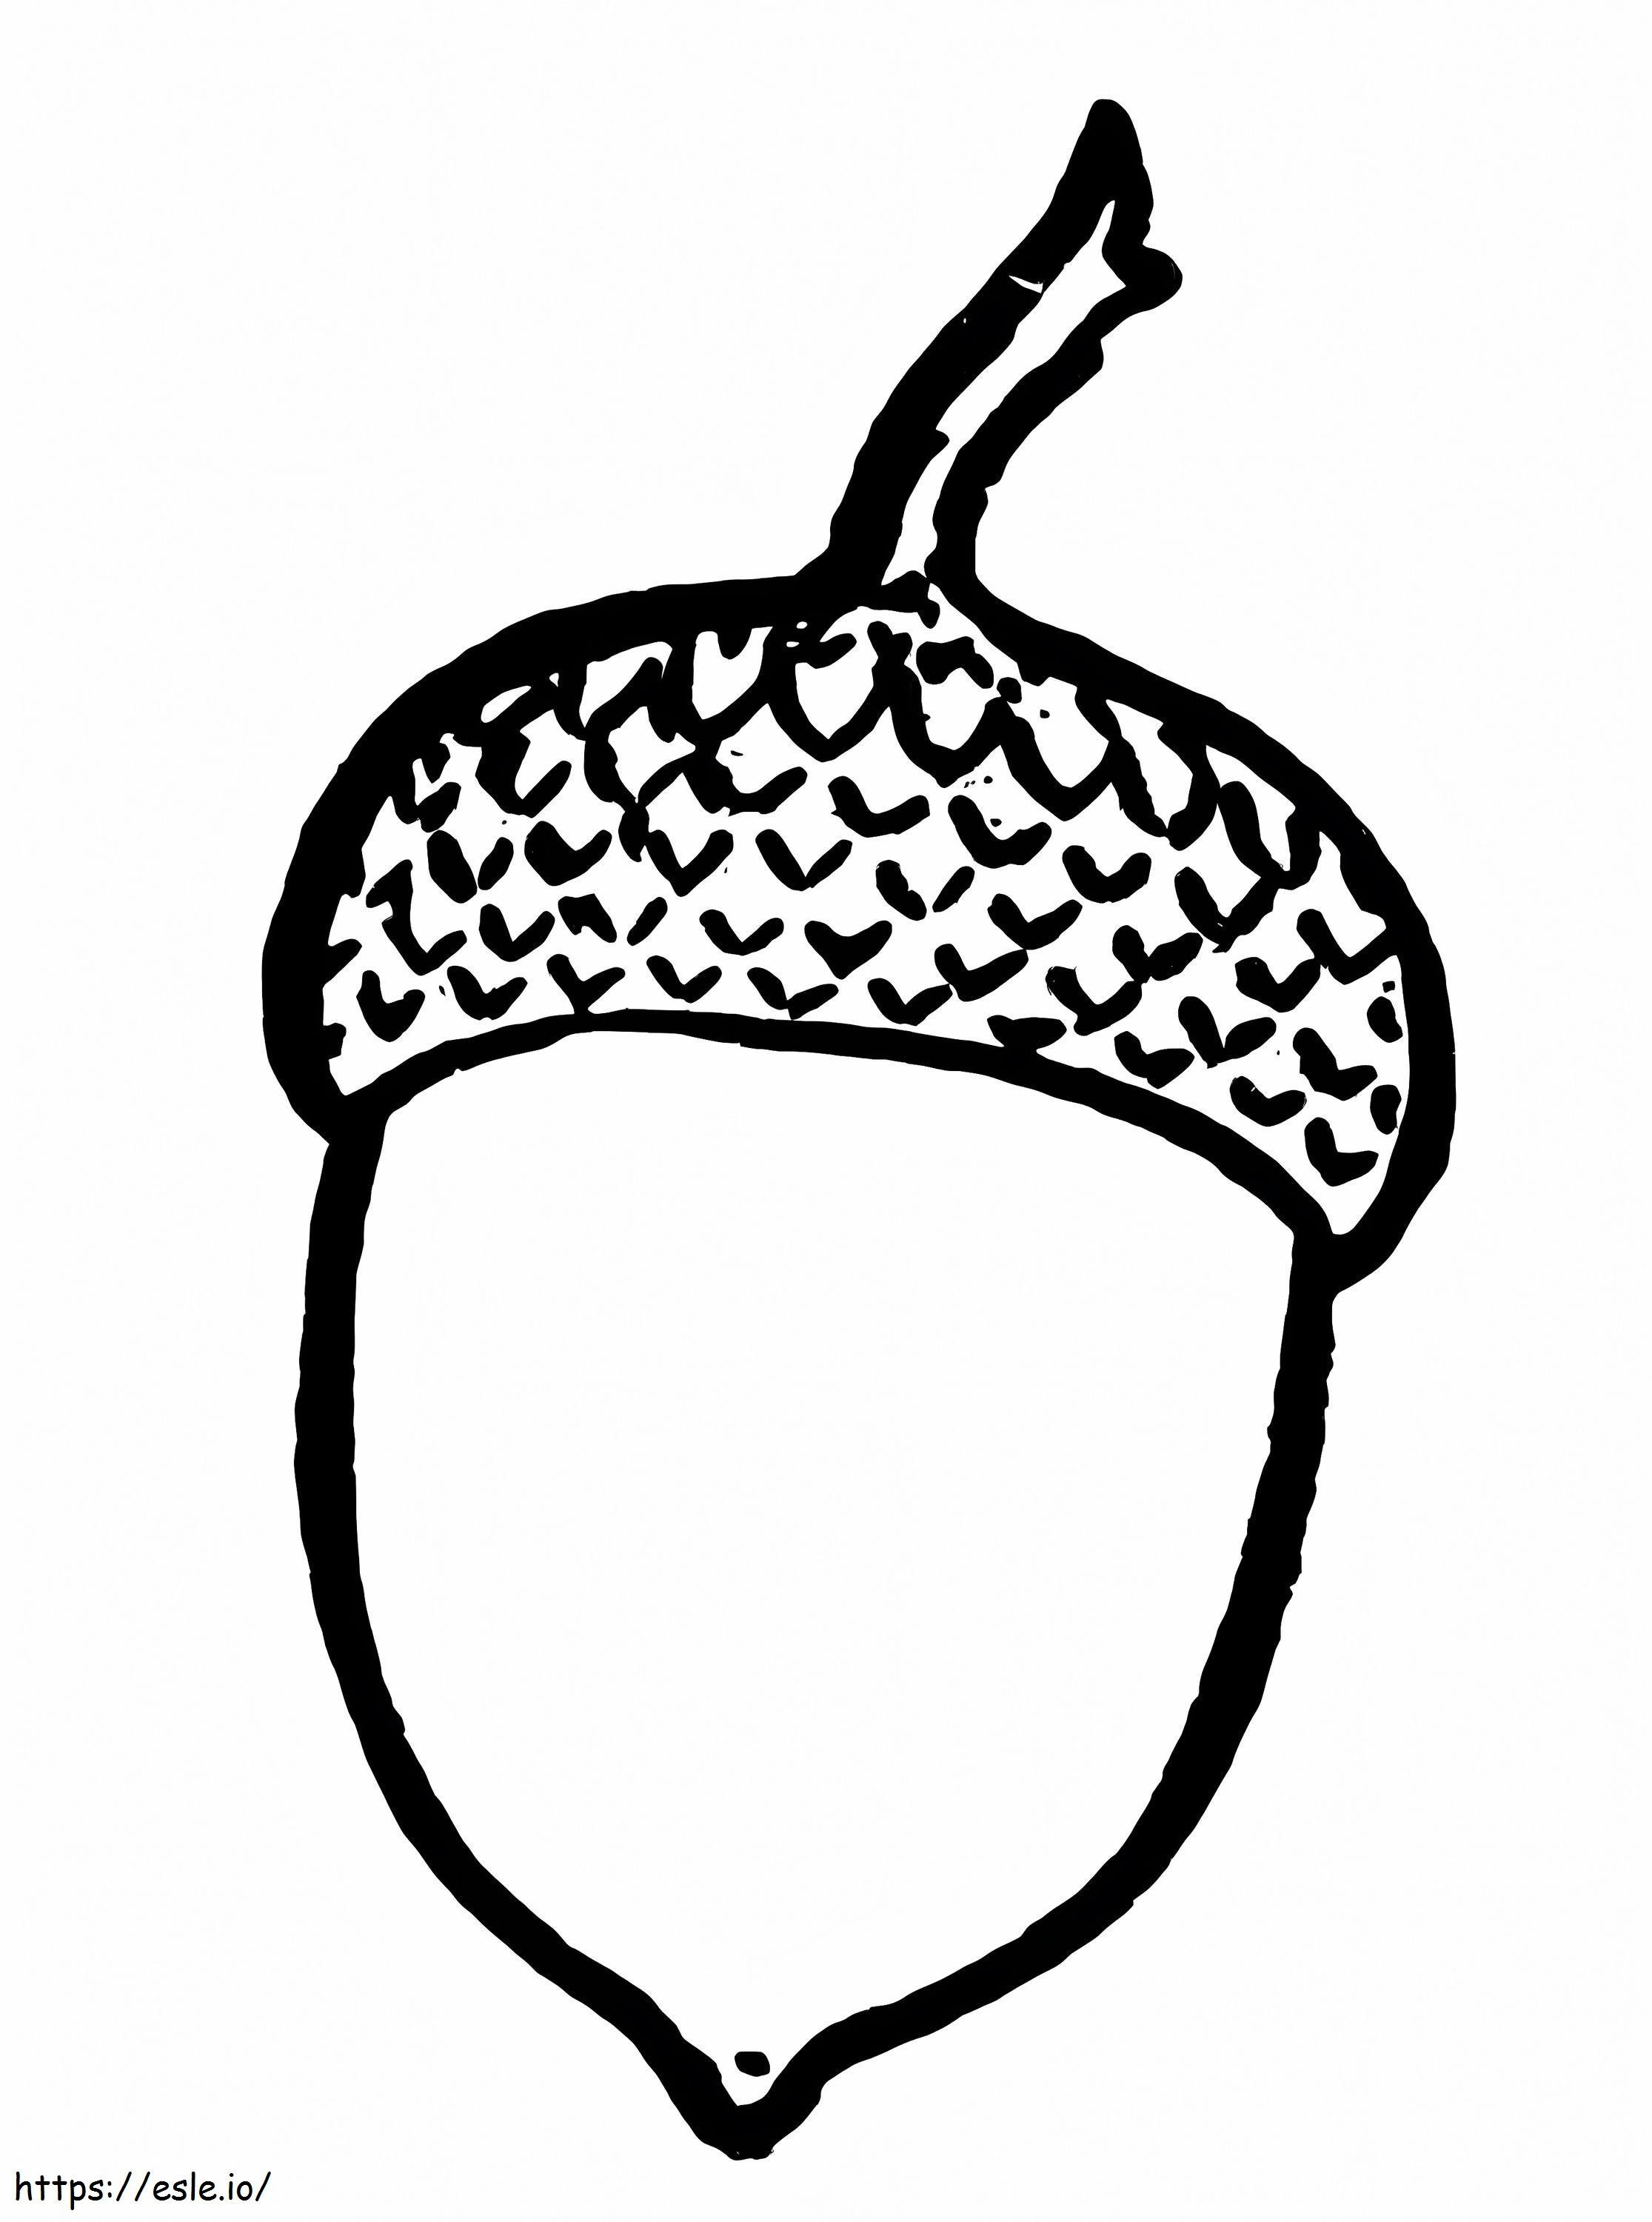 Acorn Smiles coloring page